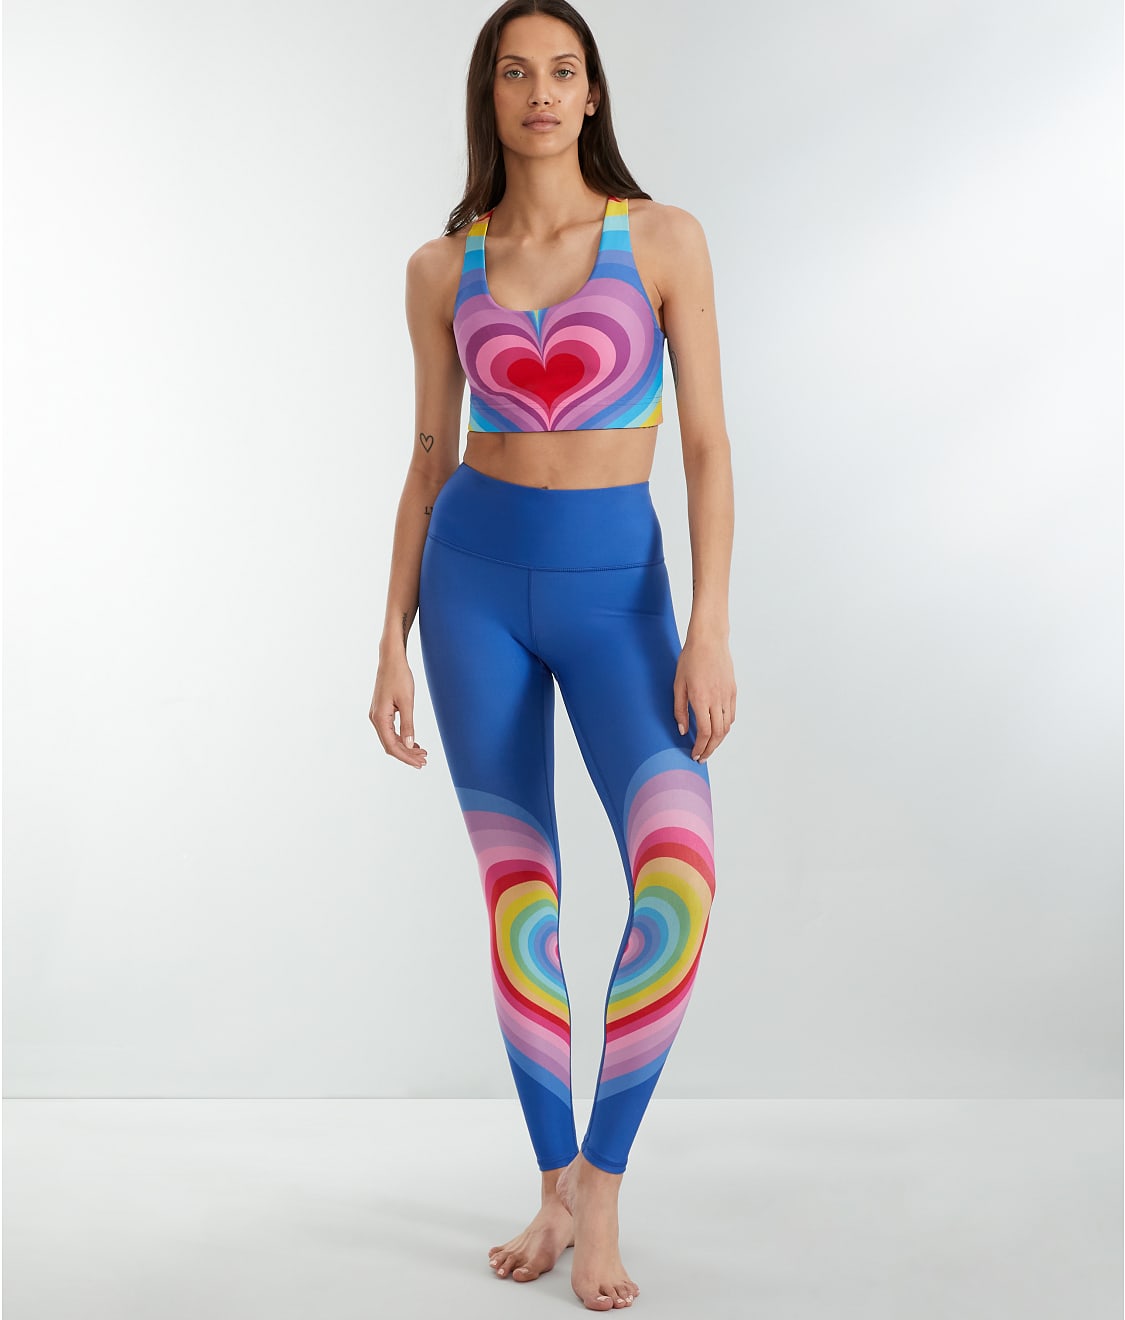 Soft Leggings For Women - High Waisted Tummy Control No See Through Workout  Yoga Pants for Sale New Zealand, New Collection Online